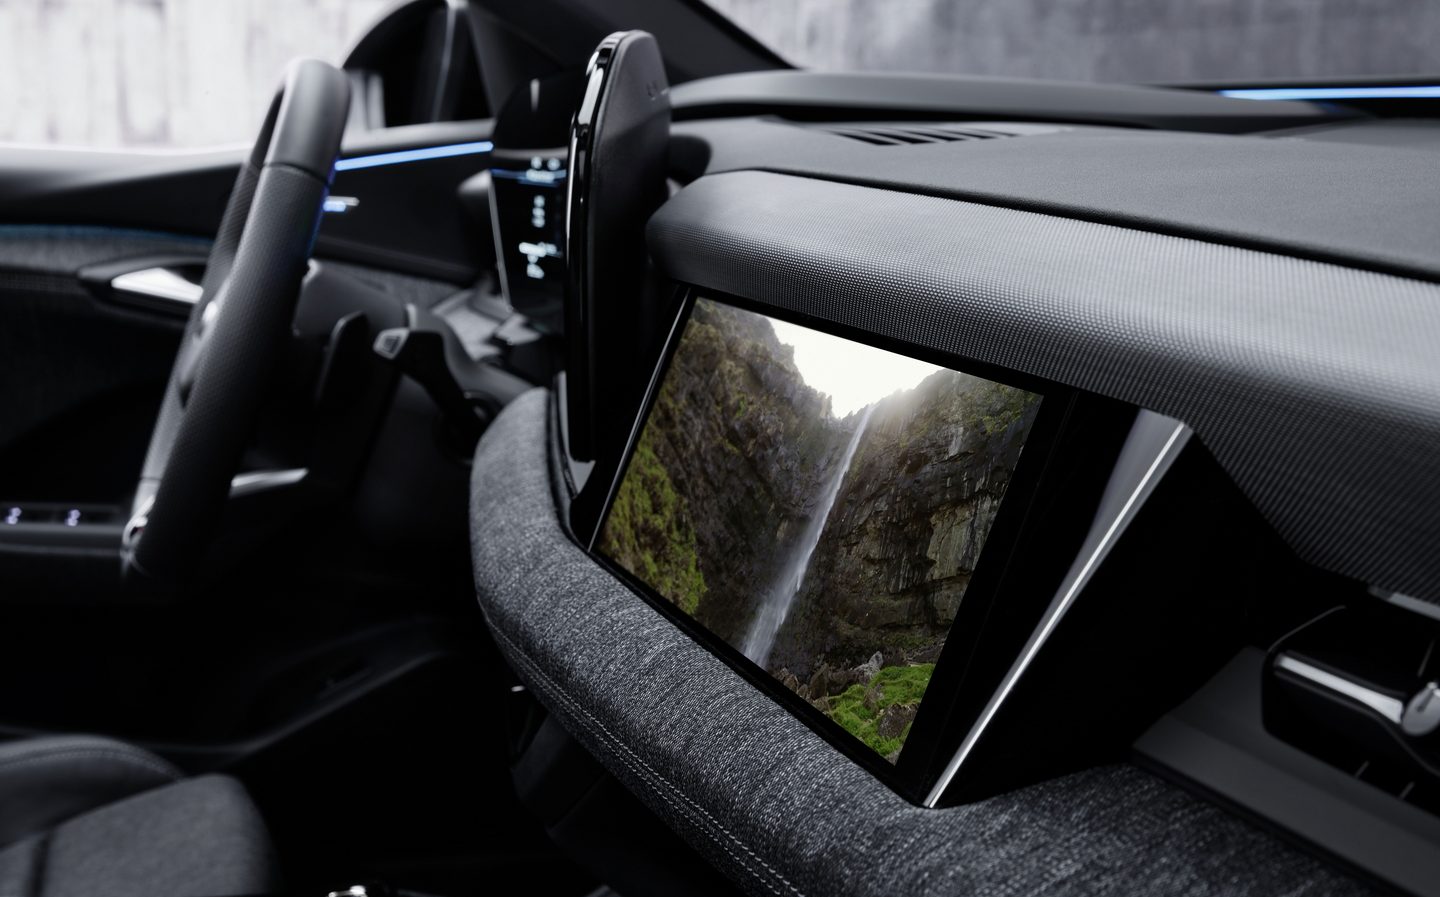 audi, e-tron, electric, interior, oled, touchscreen technology, audi q6 e-tron electric suv gains high-tech interior with extra screen for passenger